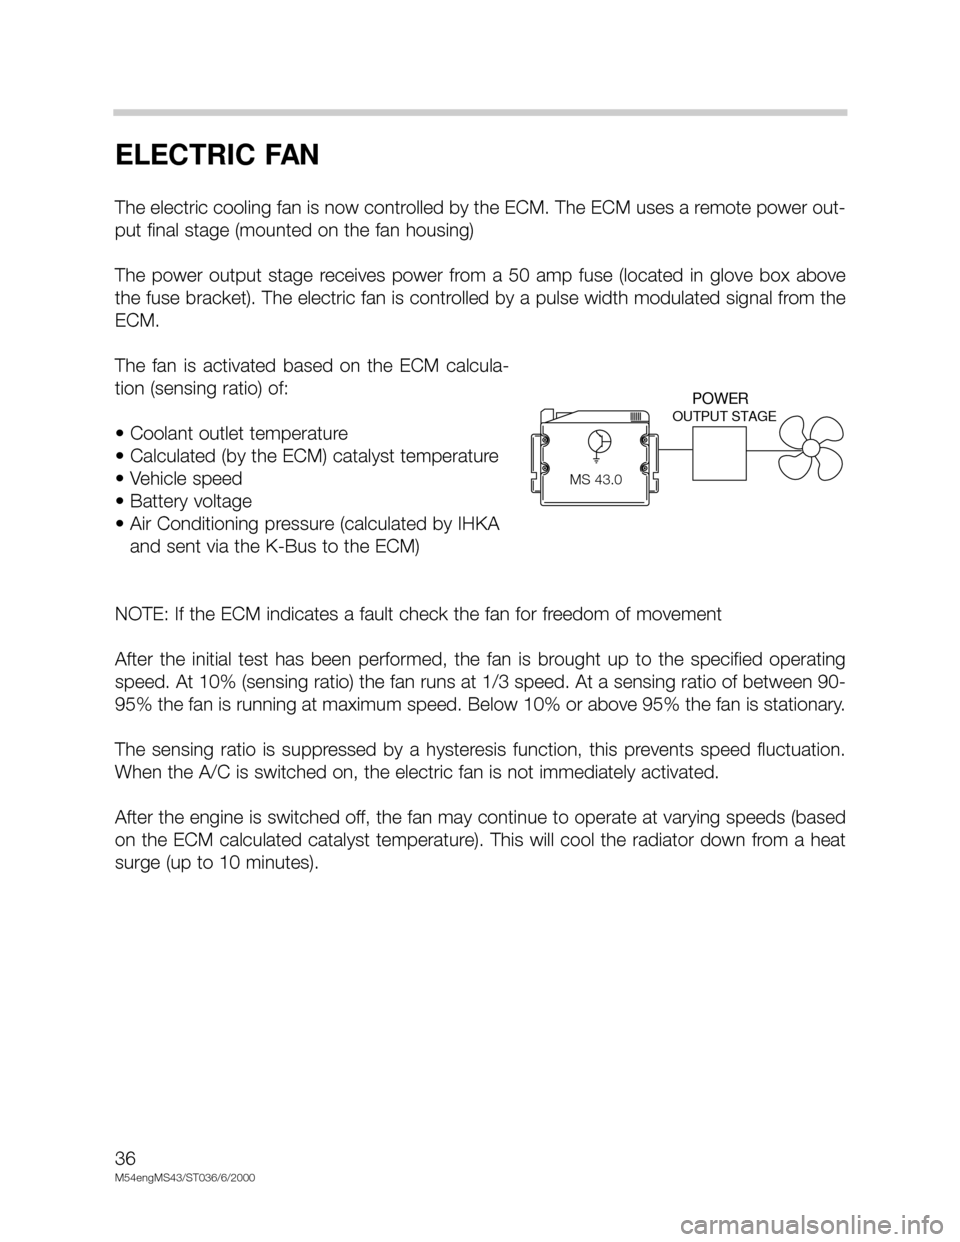 BMW X5 2002 E53 M54 Engine Workshop Manual 36
M54engMS43/ST036/6/2000
ELECTRIC FAN
The electric cooling fan is now controlled by the ECM. The ECM uses a remote power out-
put final stage (mounted on the fan housing)
The  power  output  stage  